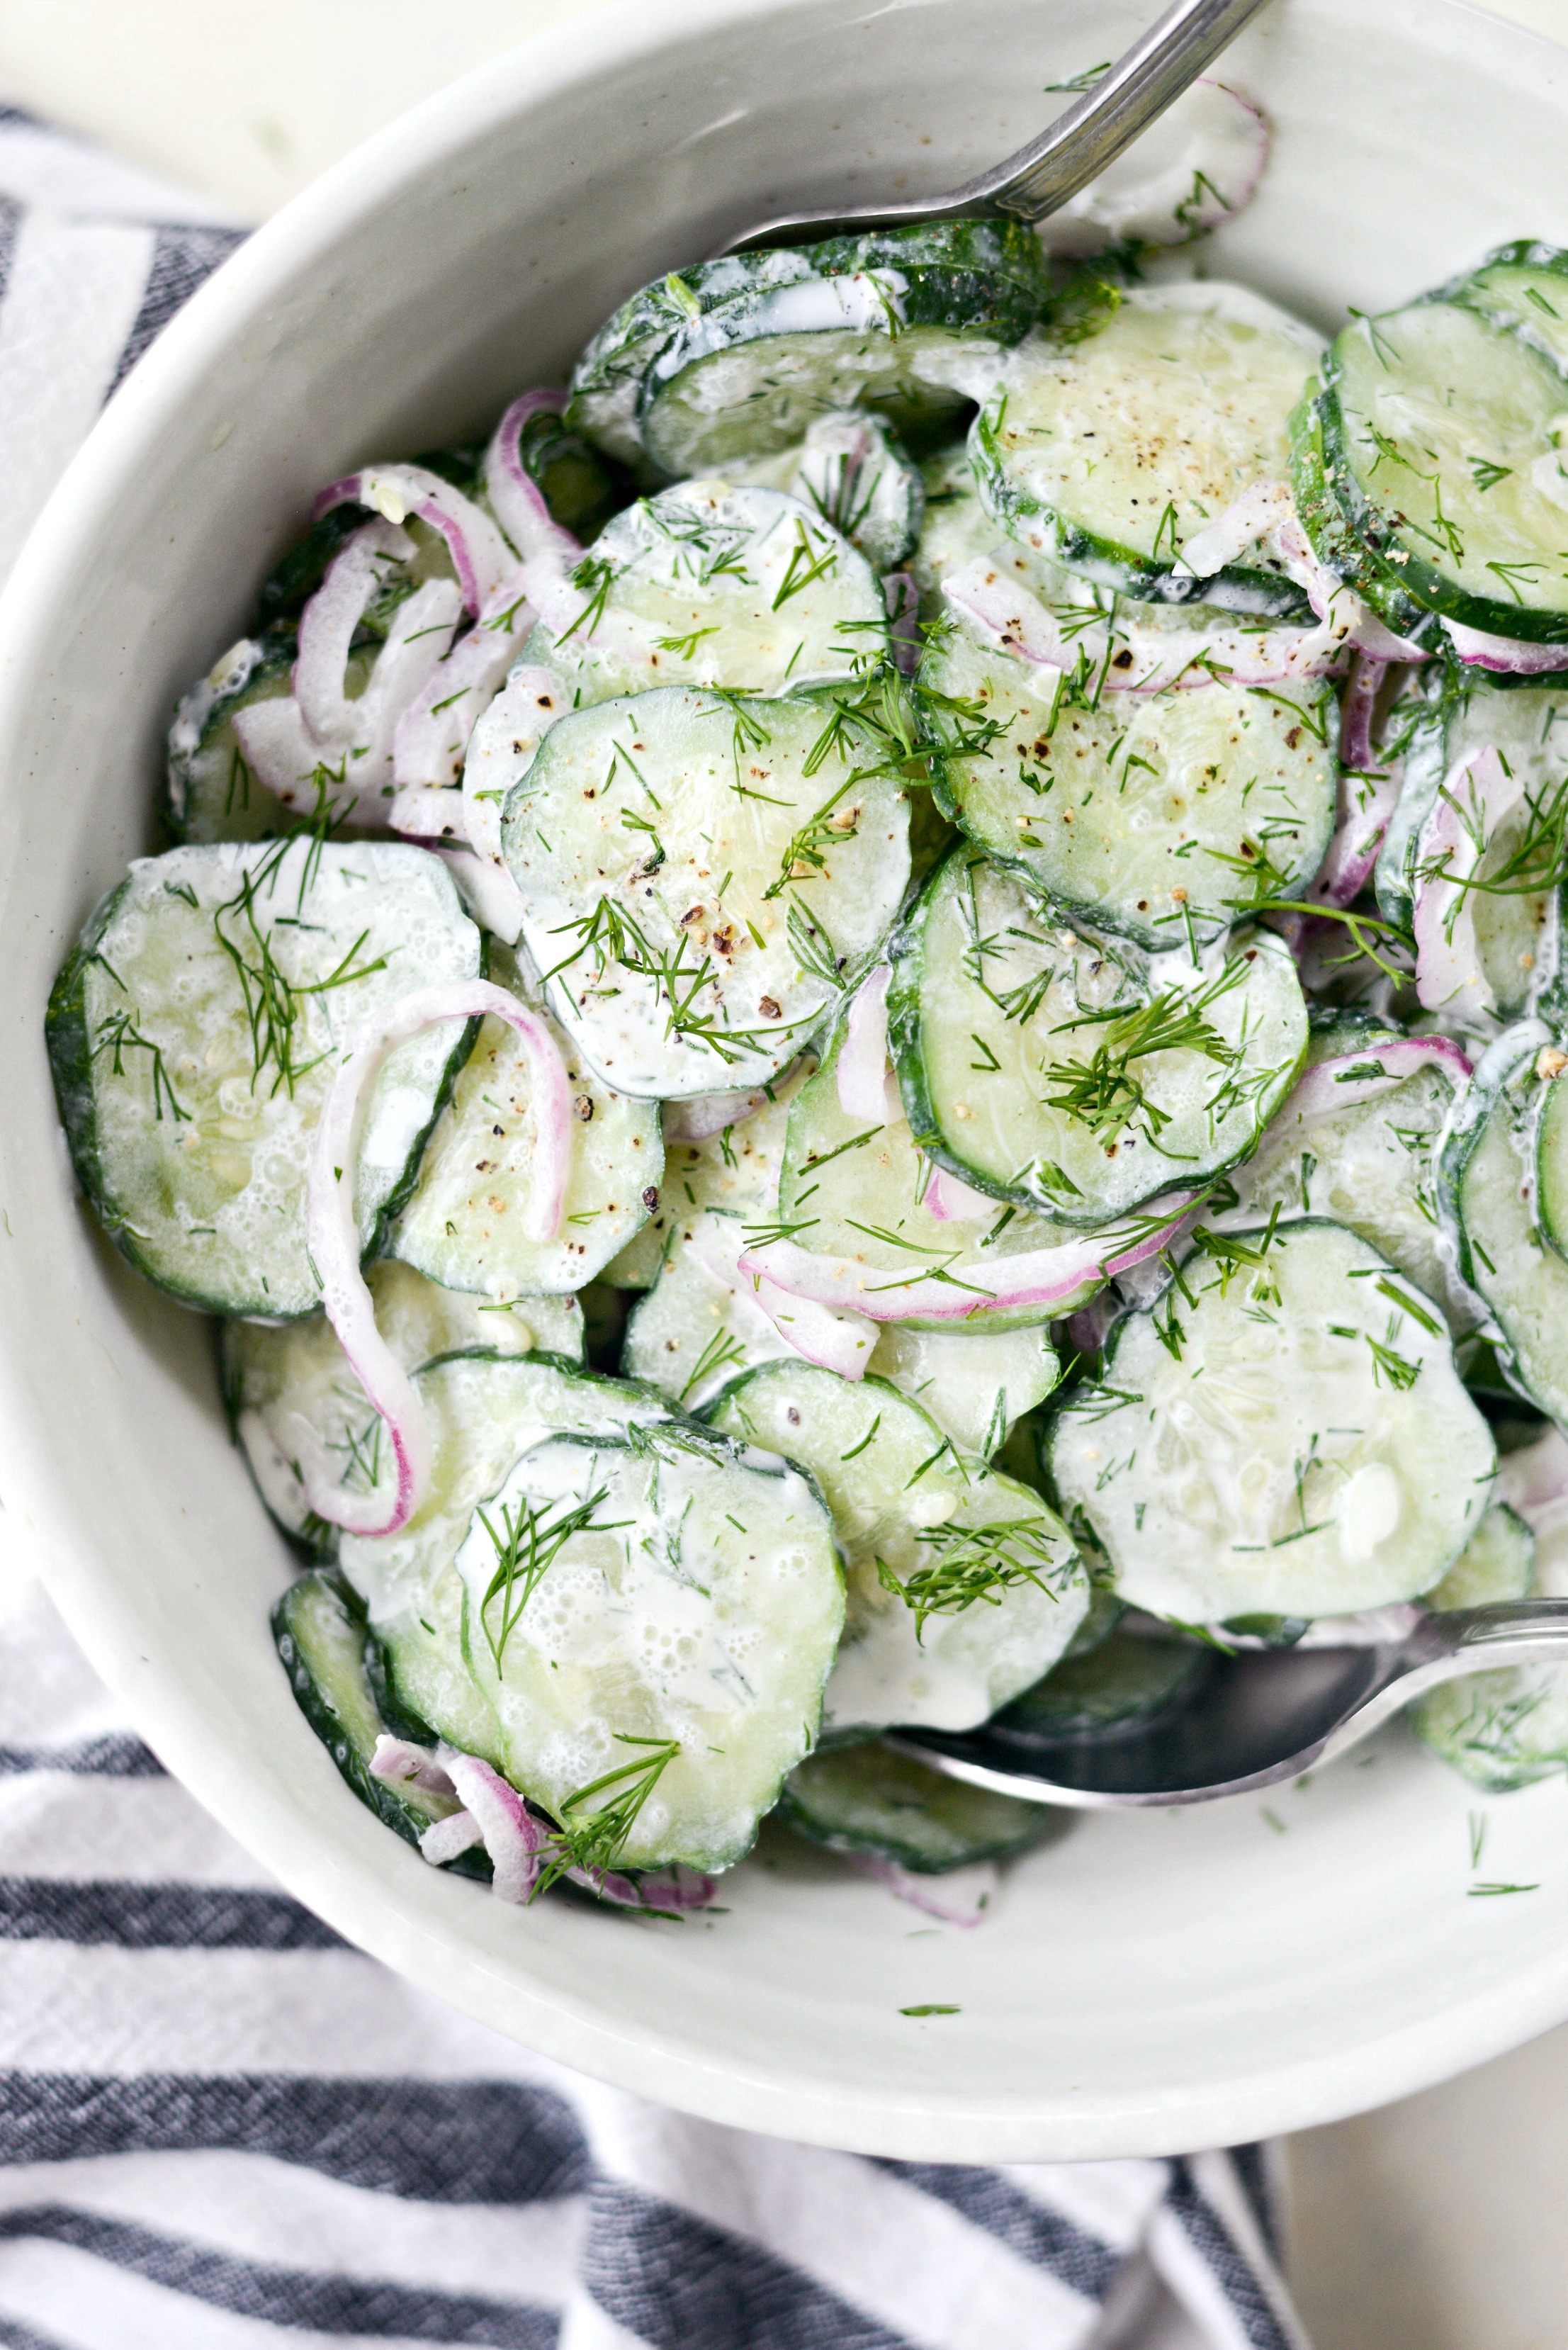 Cucumbers with Dill Recipe: How to Make It